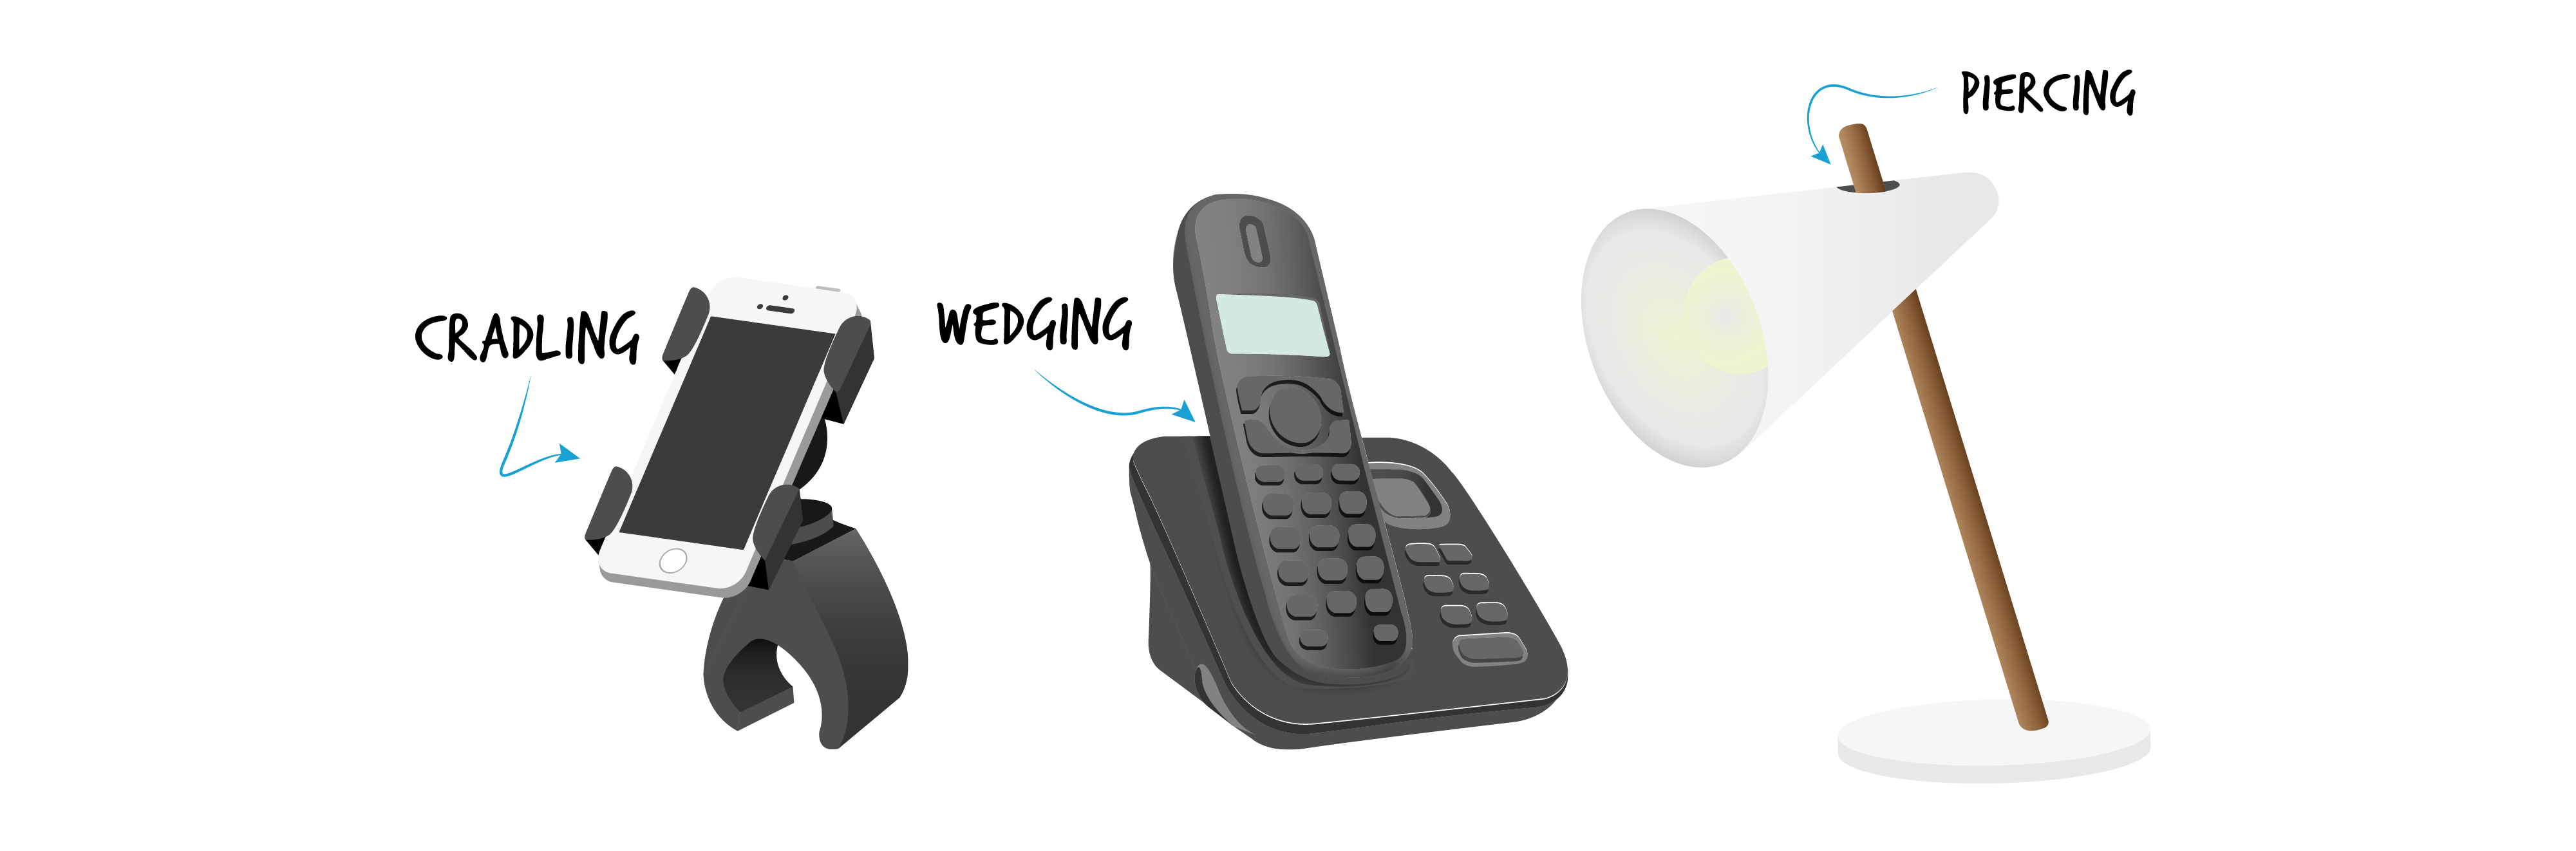 Three examples show different types of connections between product parts. On the left, a cell phone is cradled in a holder. In the middle, a desktop phone is wedged into its base. On the right, and a horizontal and conical lamp shade is pierced by its diagonal support rod.